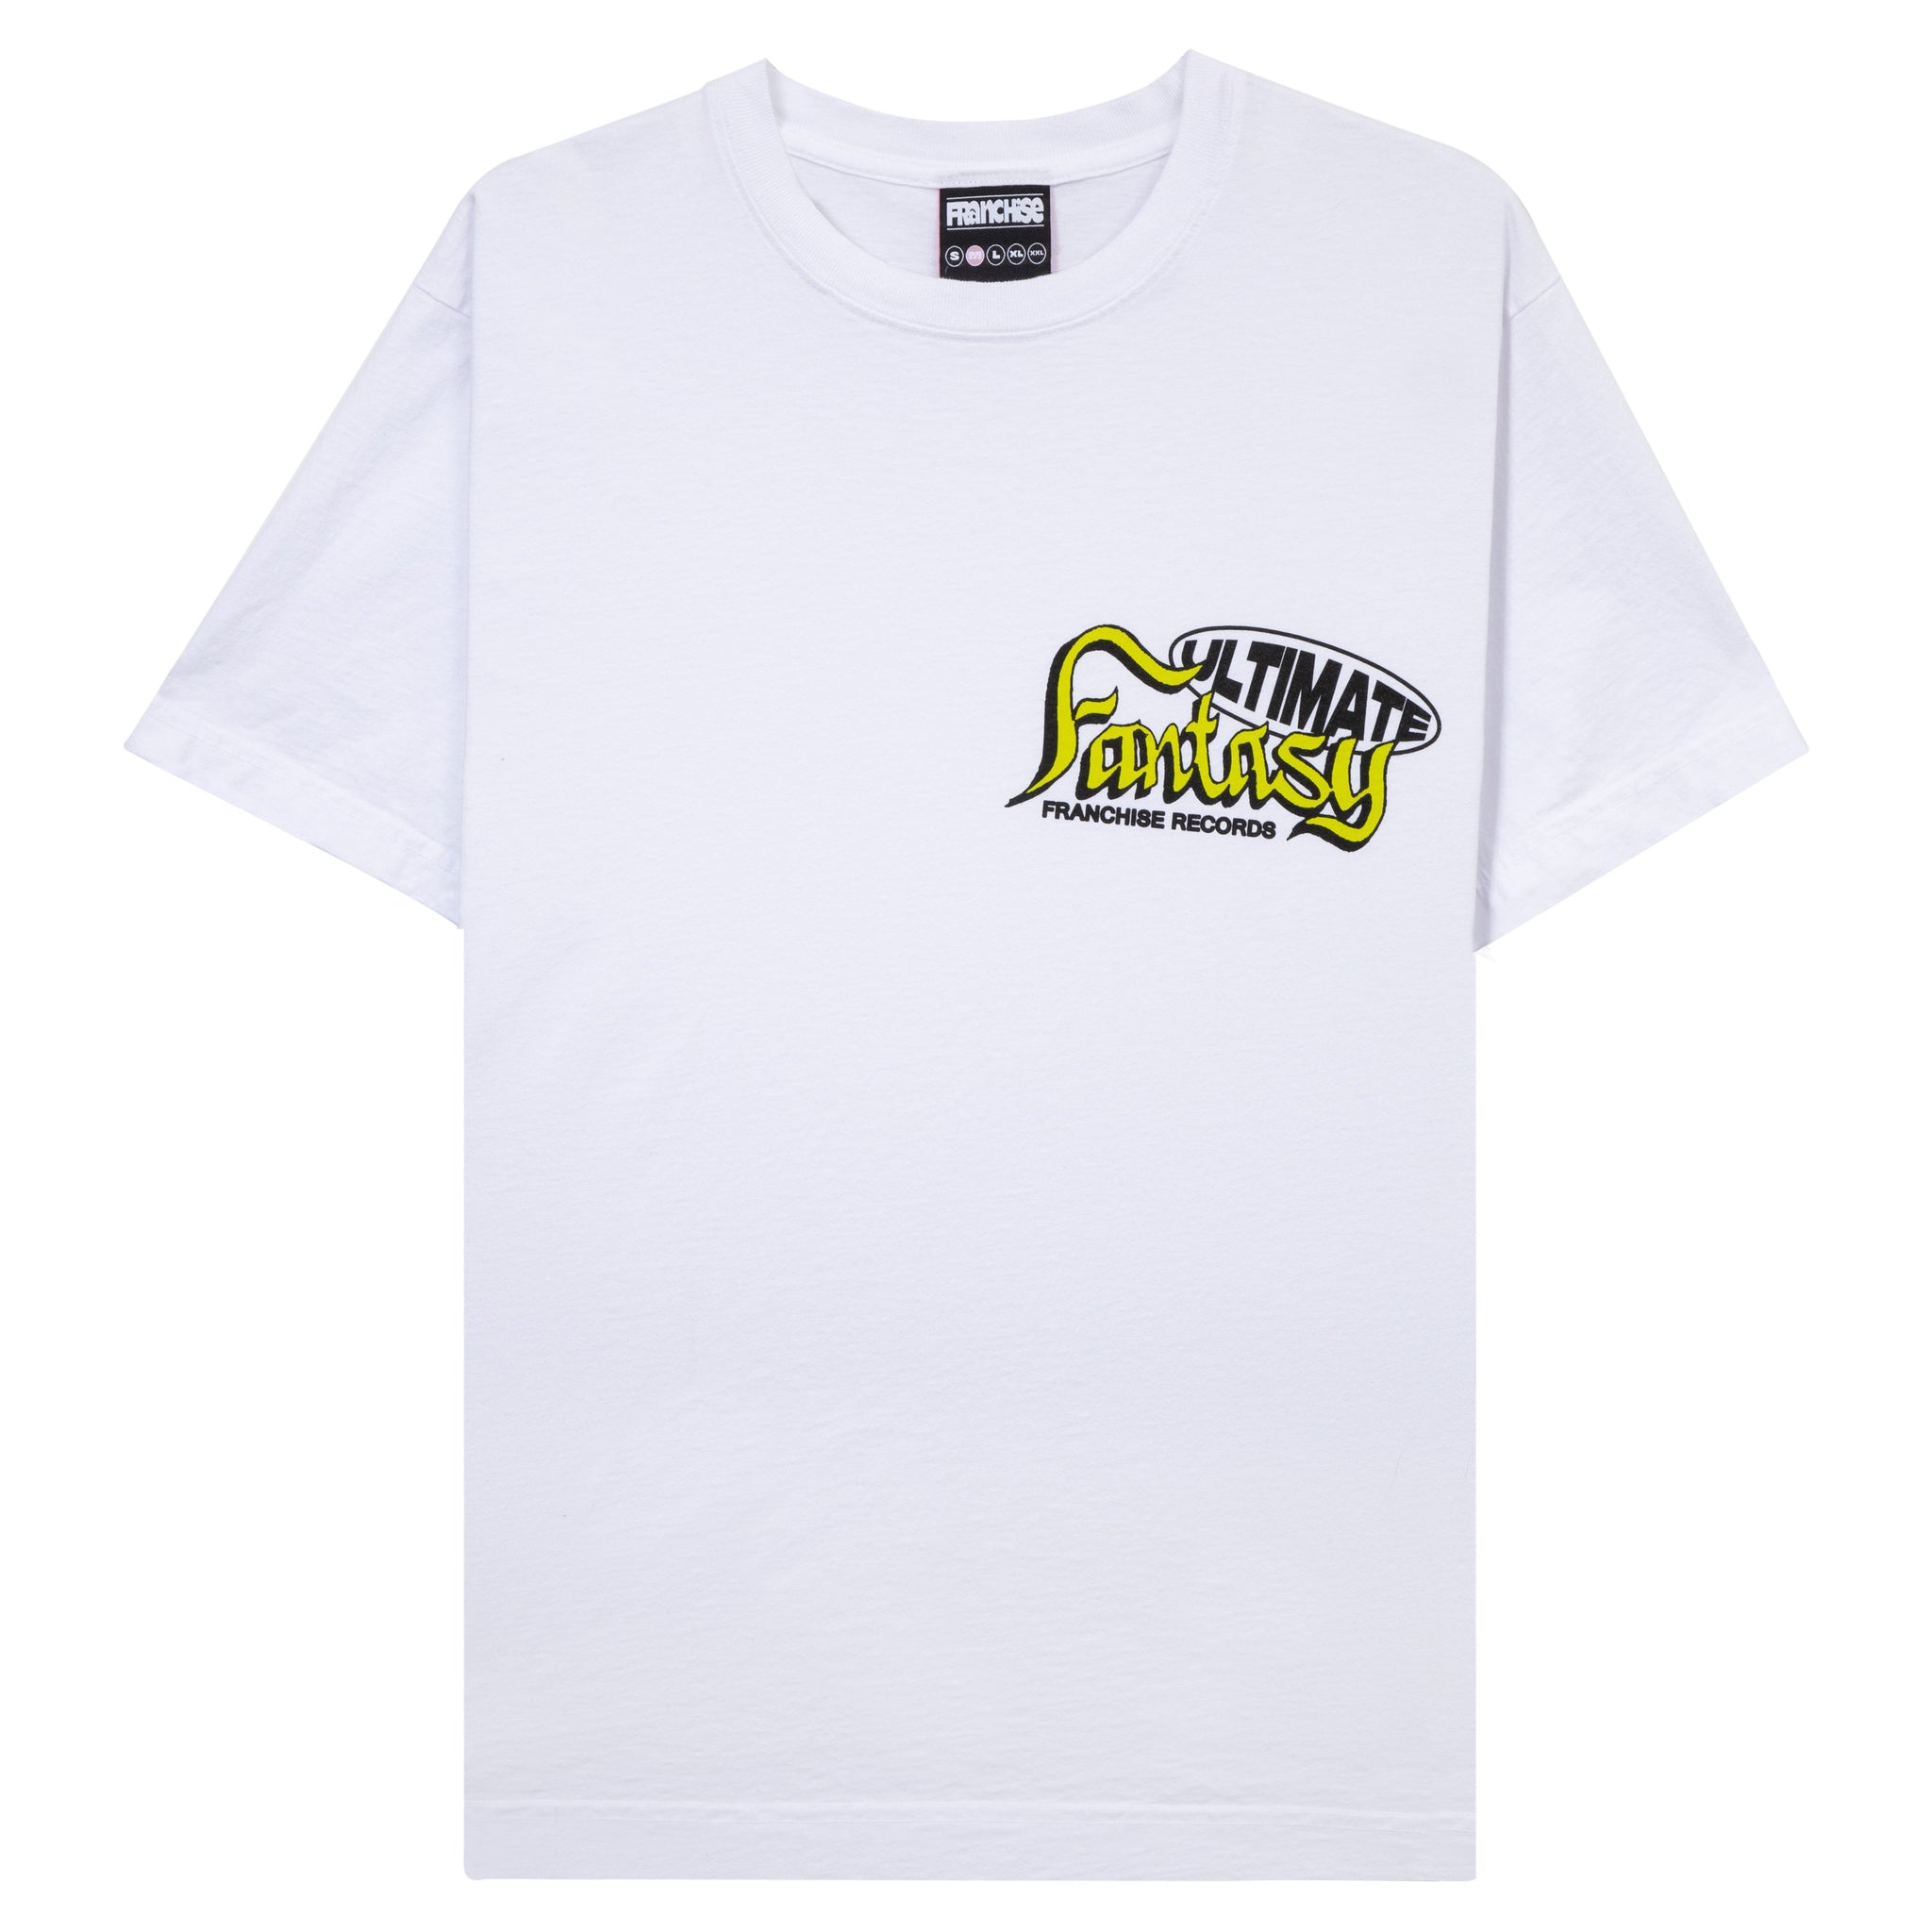 Ultimate Fantasy SS Tee